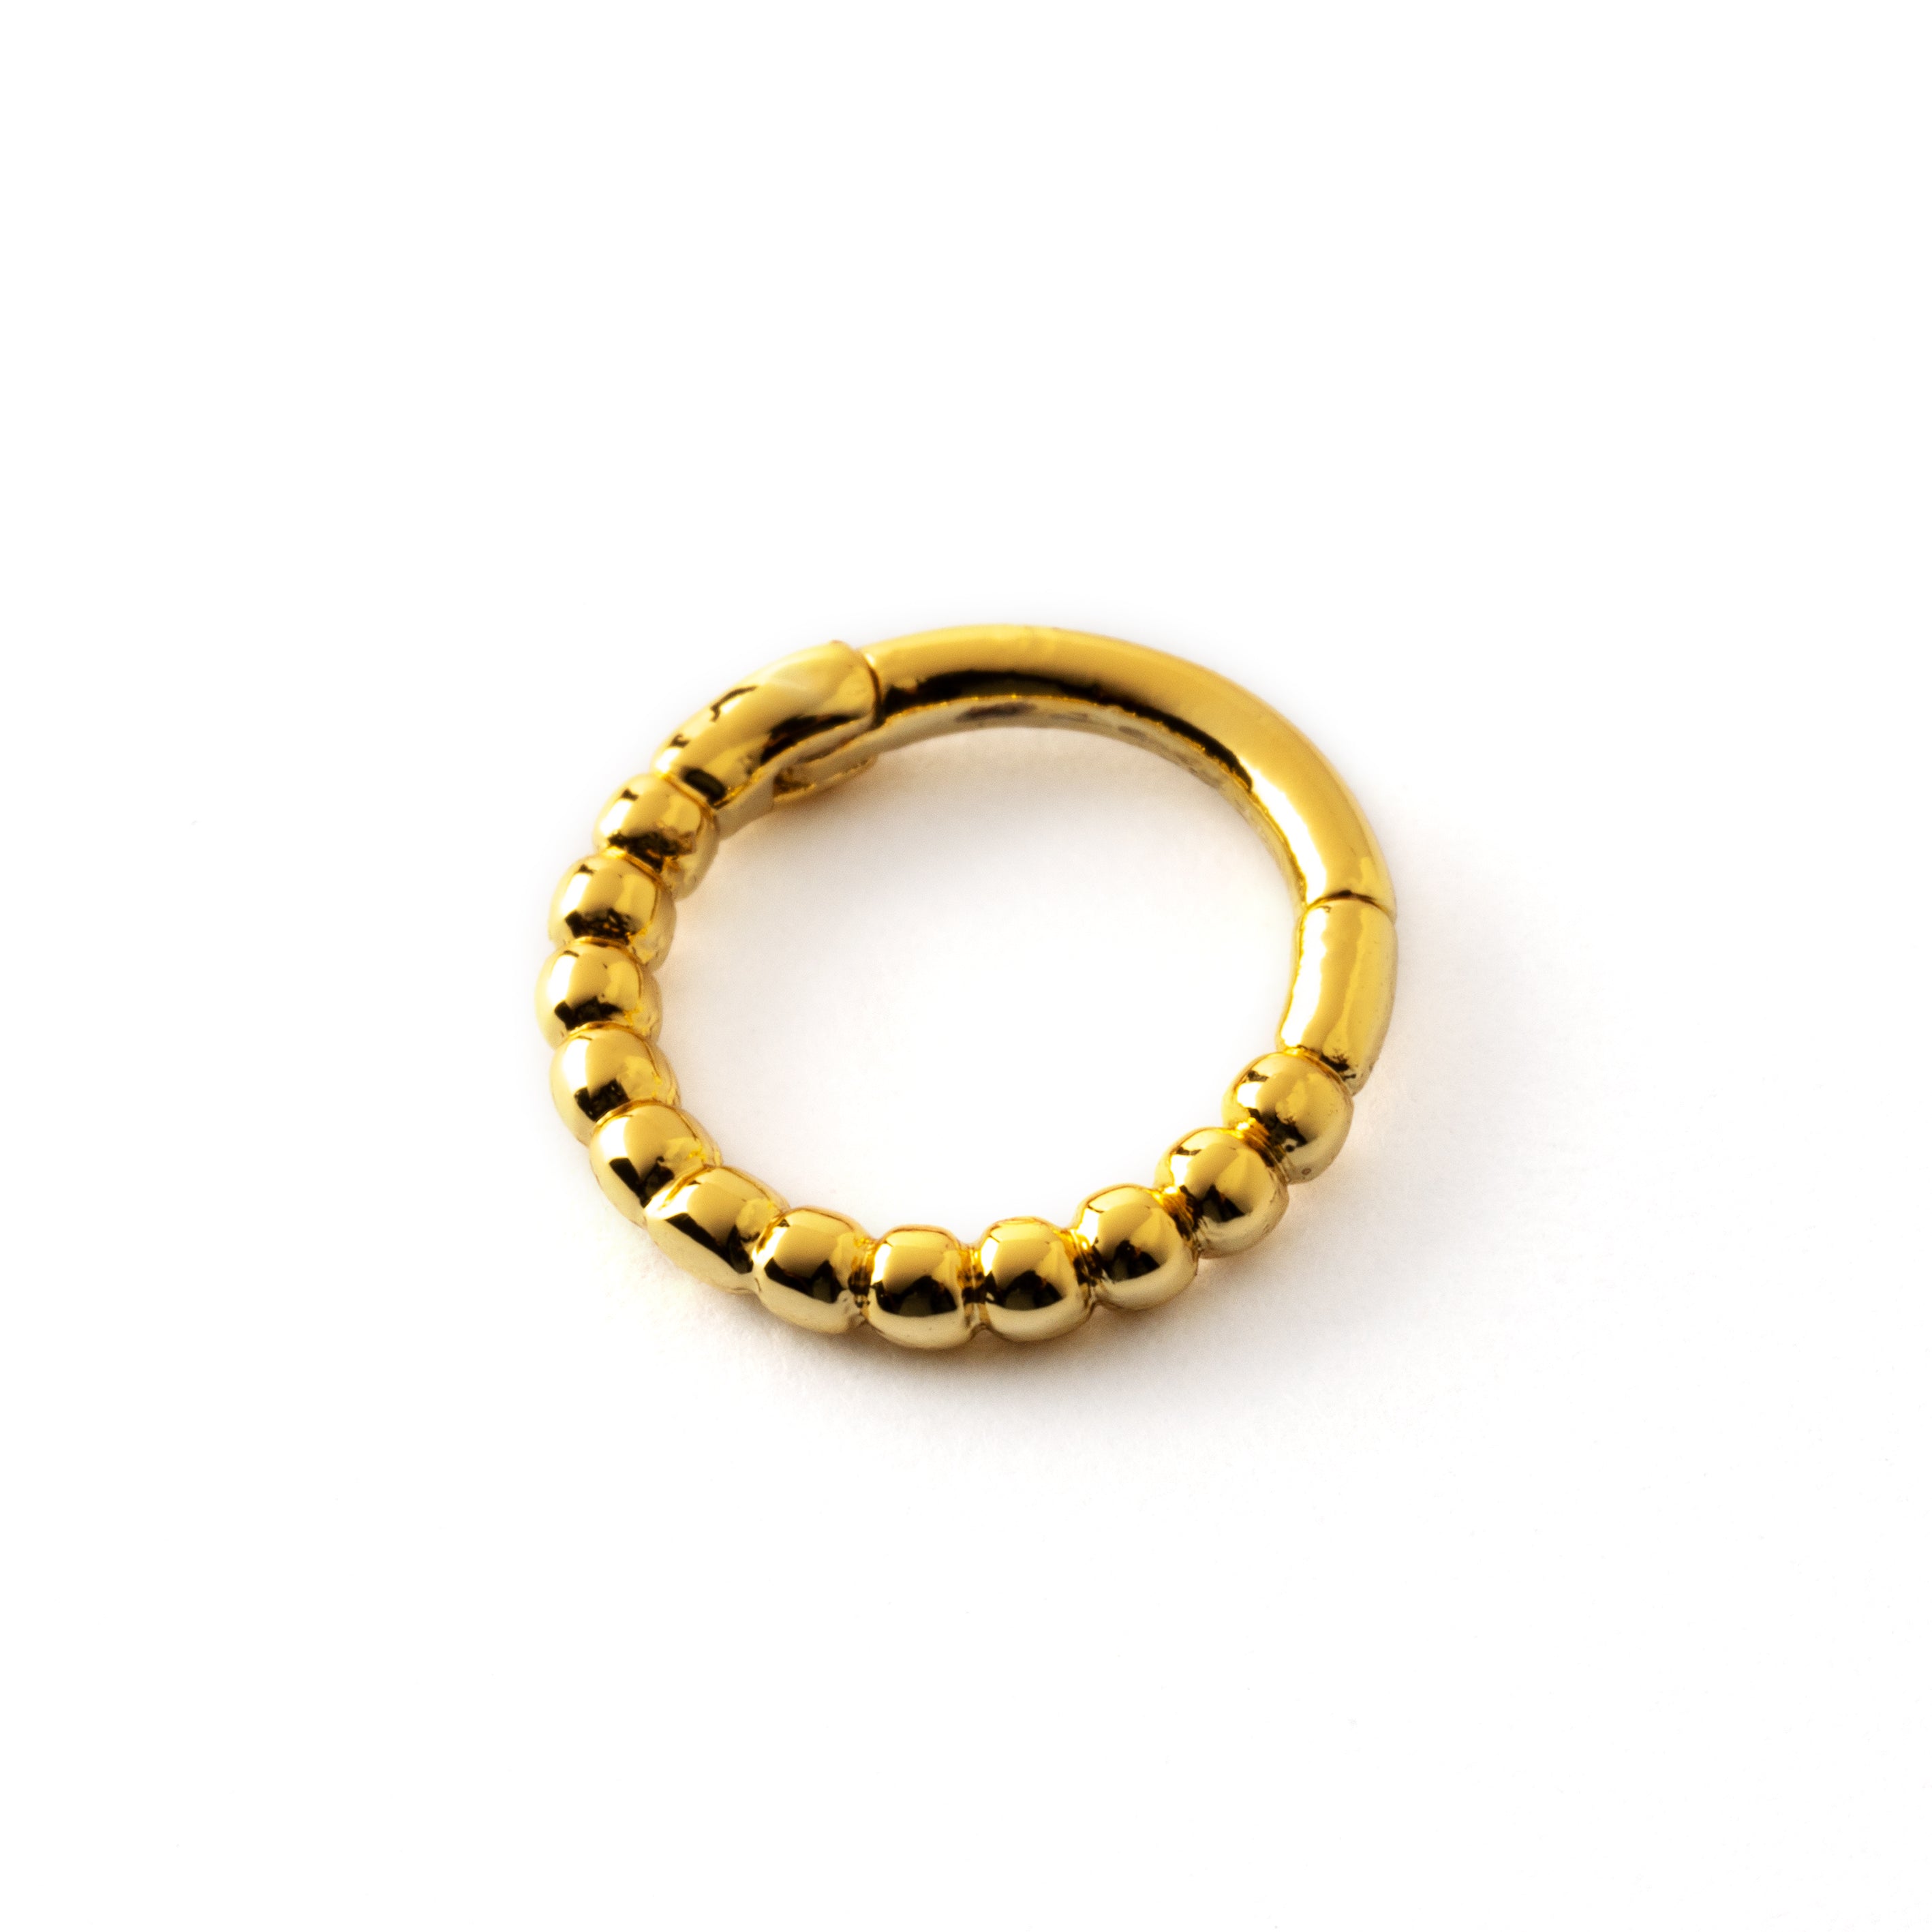 Golden surgical steel dotted piercing clicker ring 